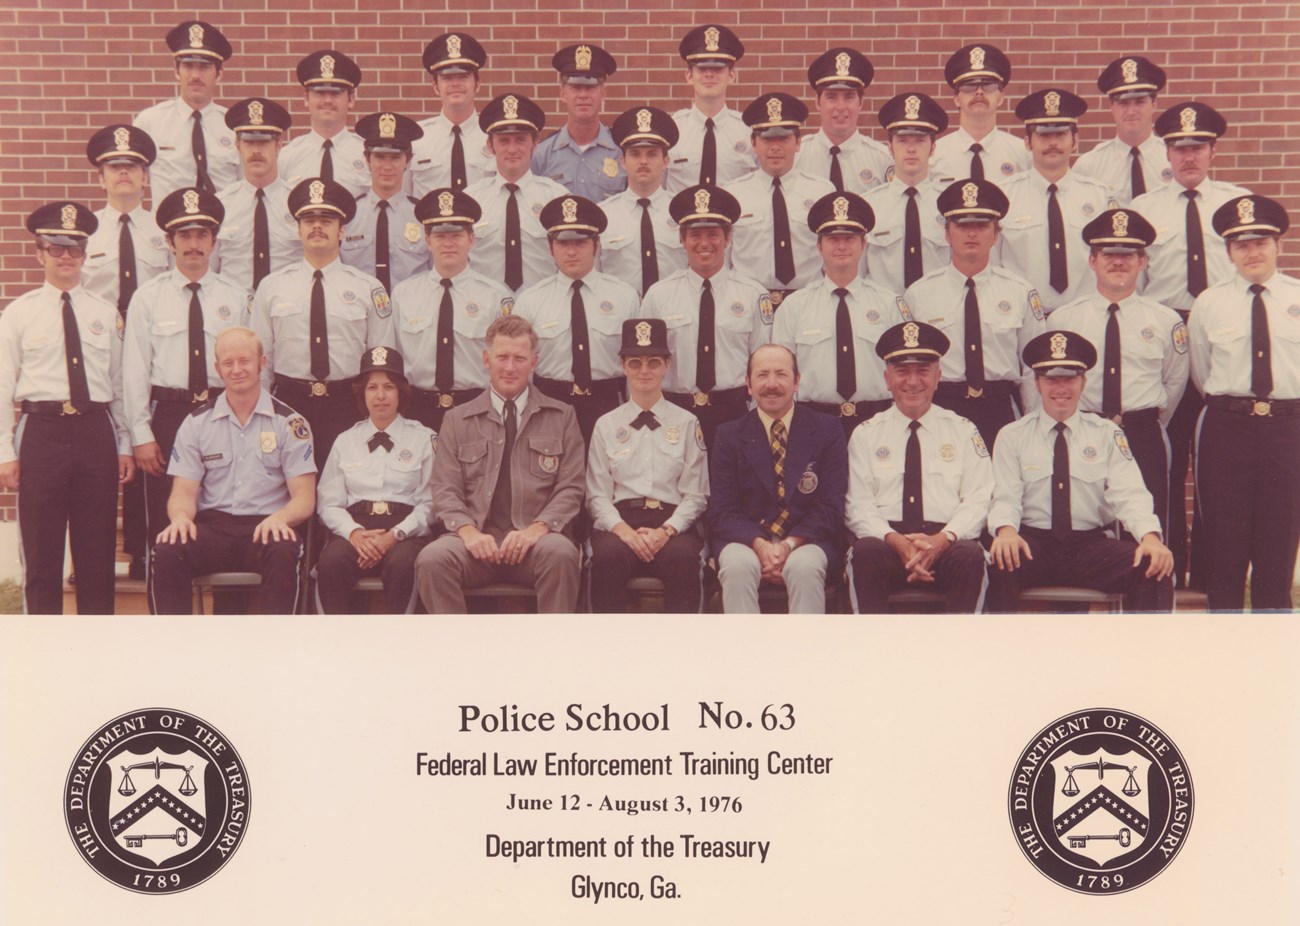 Four rows of US Park Police officers, most in uniform, pose for a class photo.